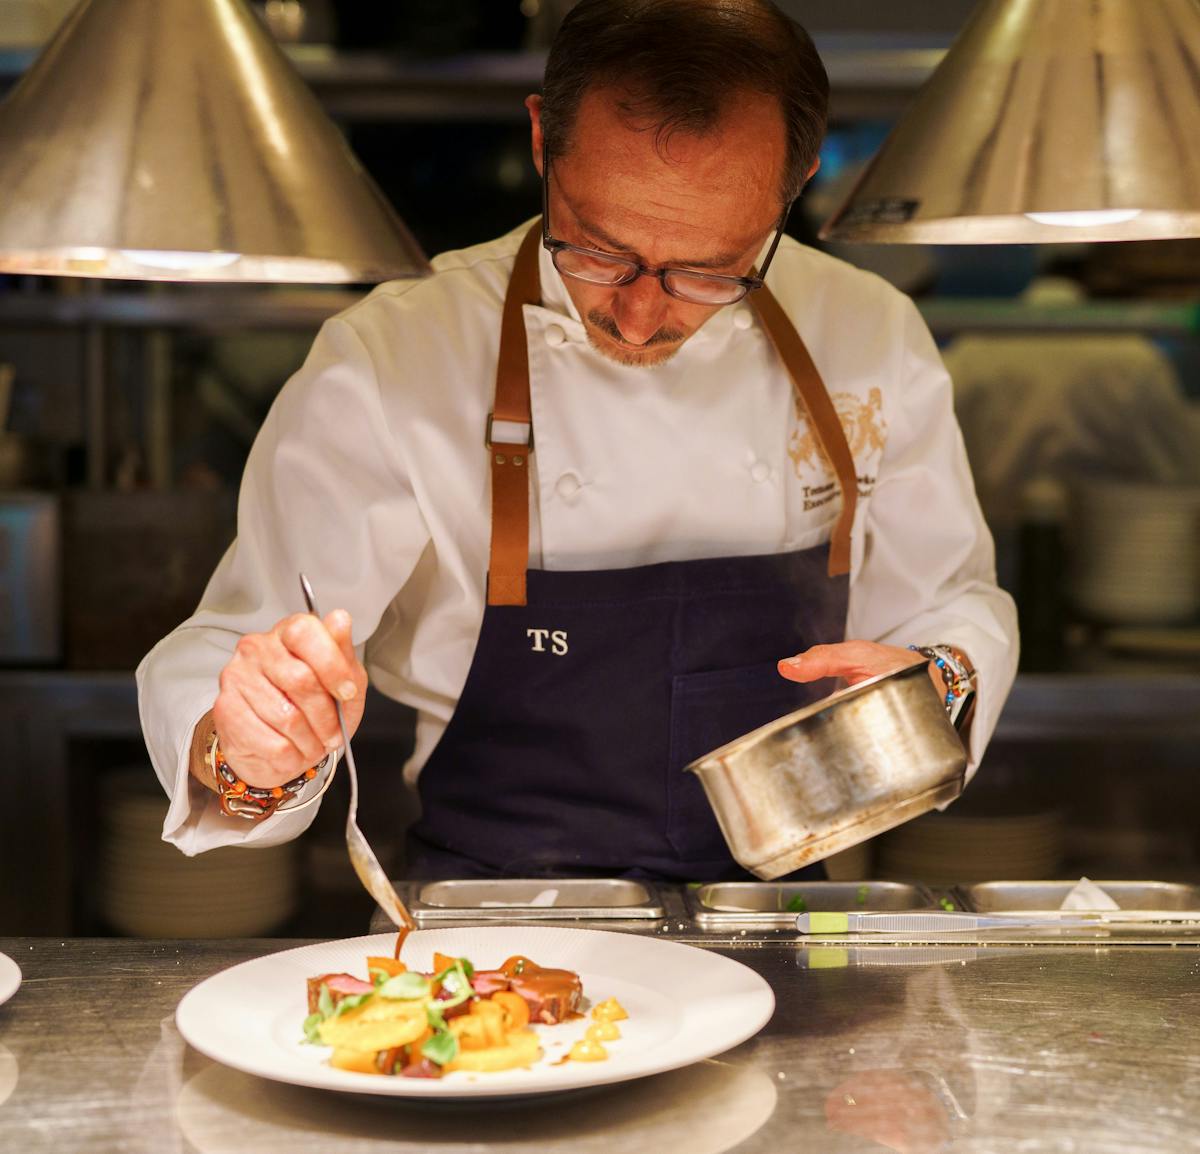 a man plating food on a dish